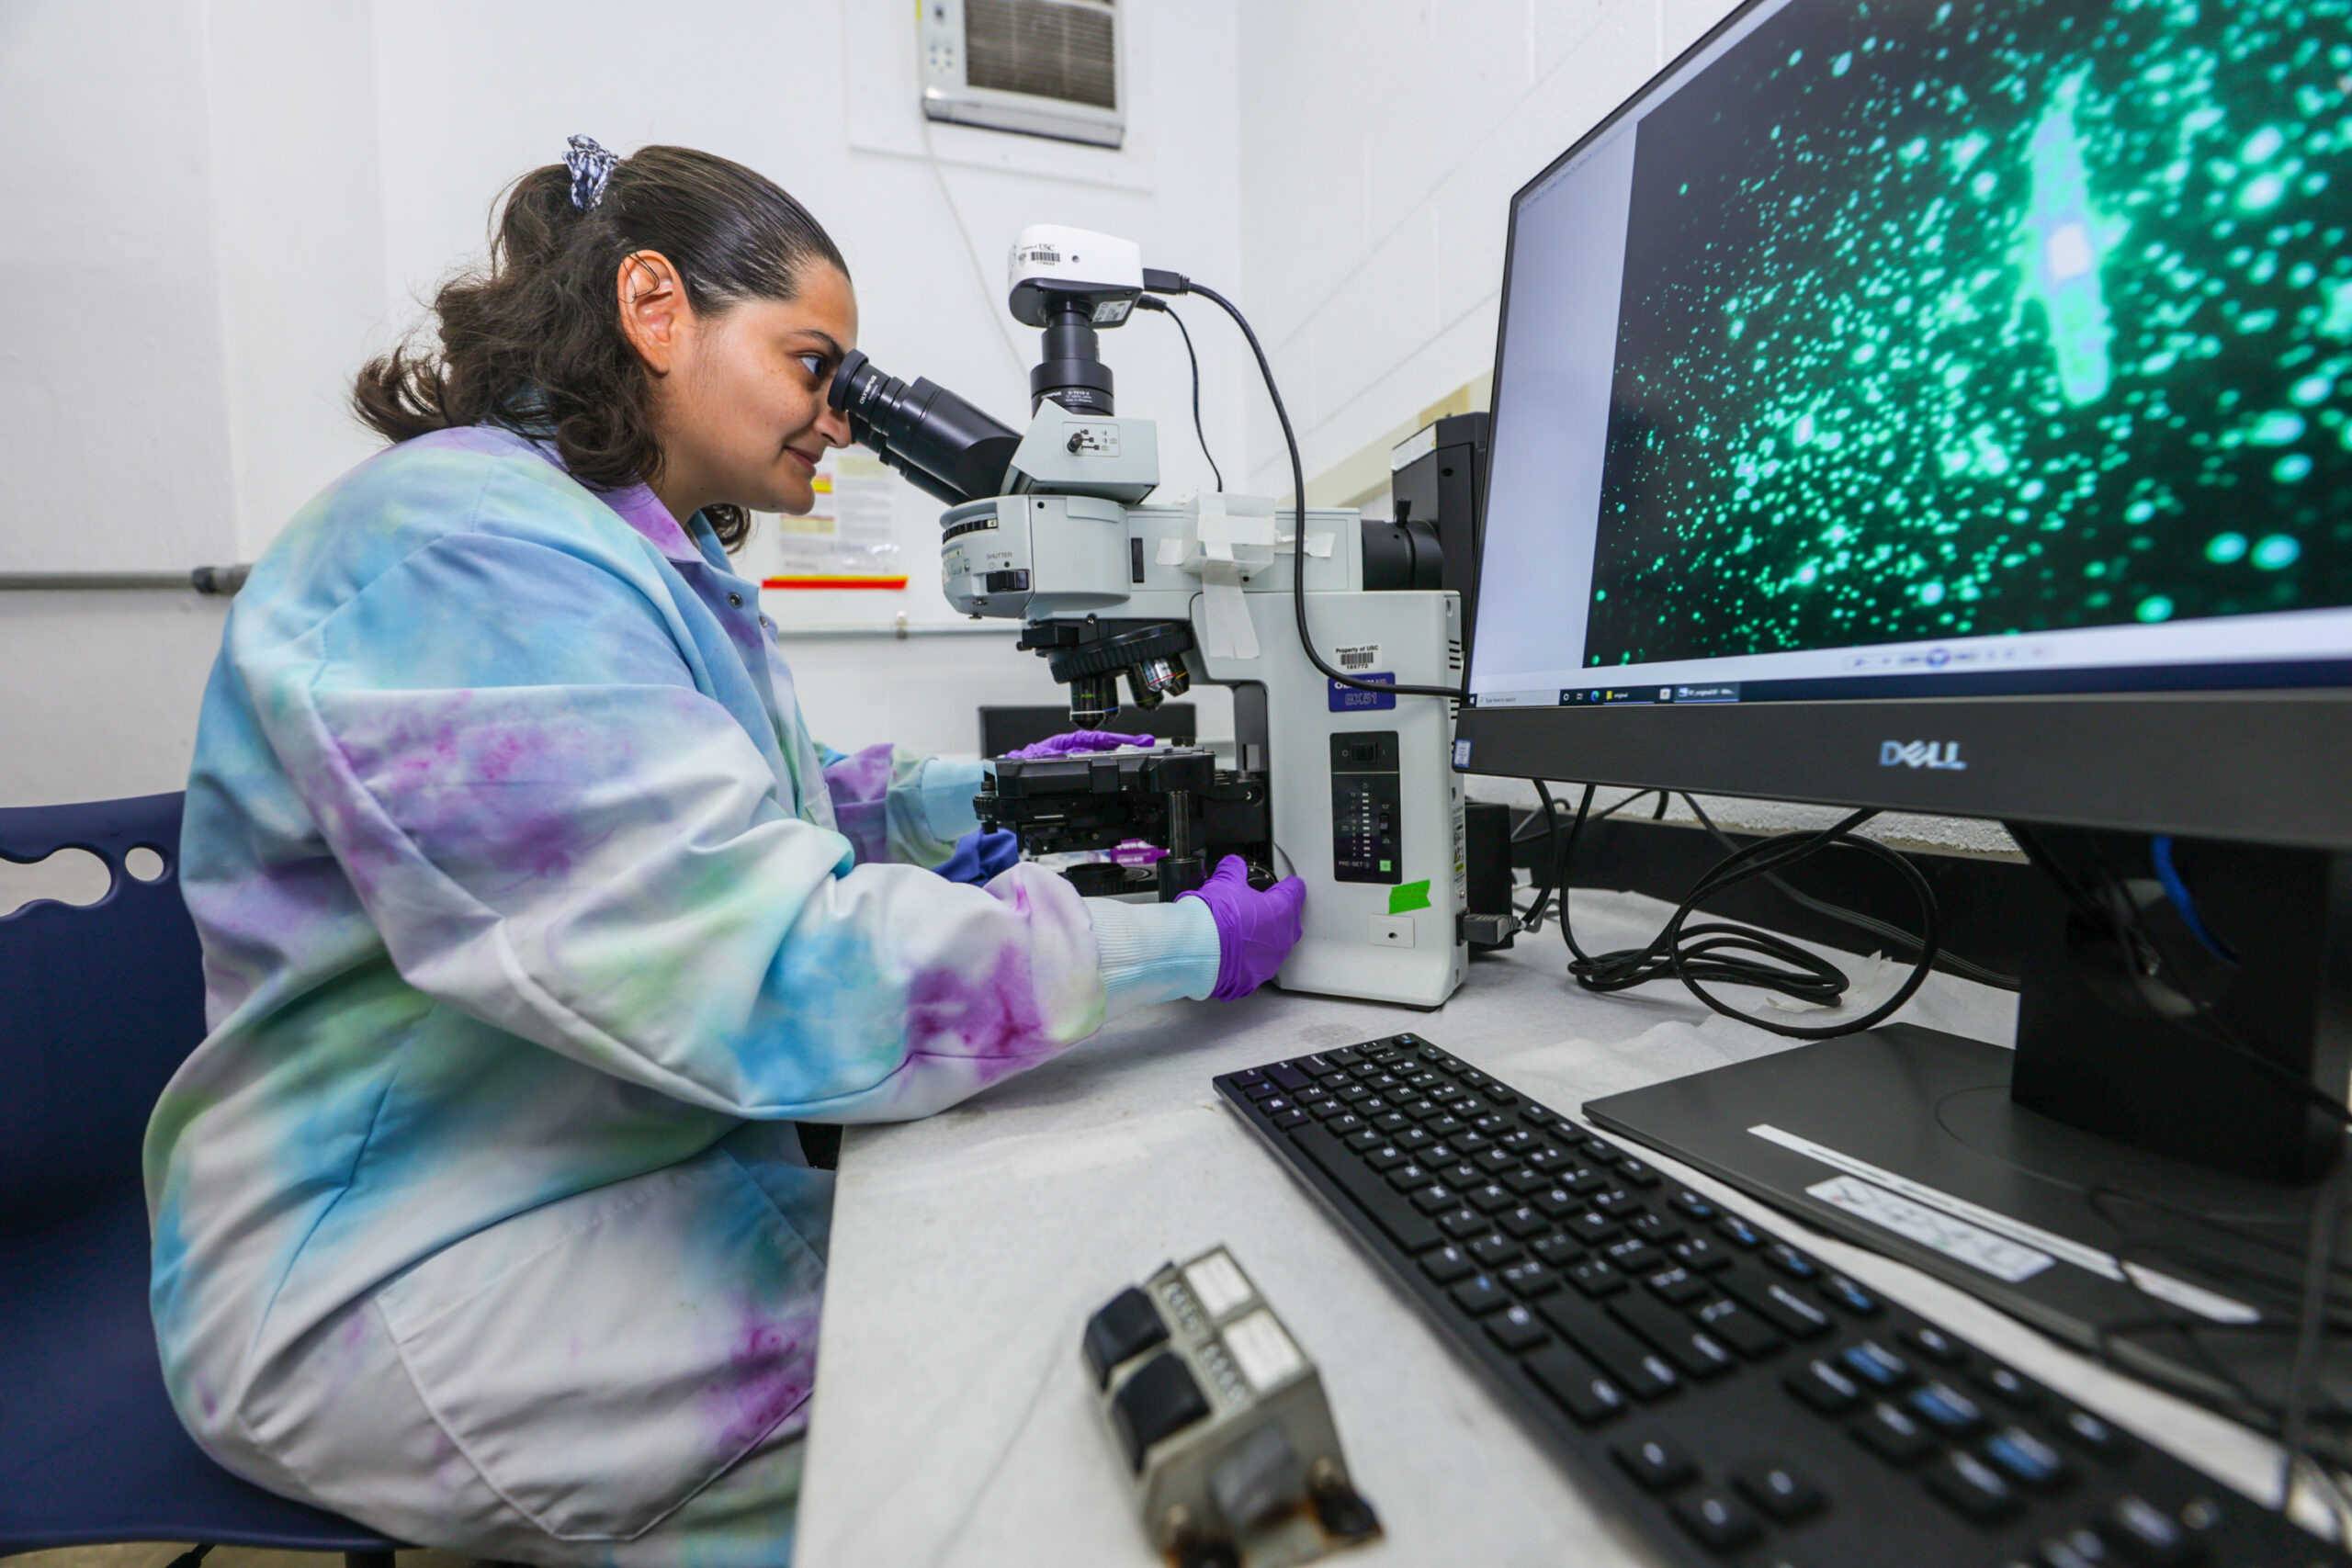 a researcher wearing a tie-dyed lab coat looks into a microscope that is projecting a fluorescent image of microorganisms onto a nearby monitor